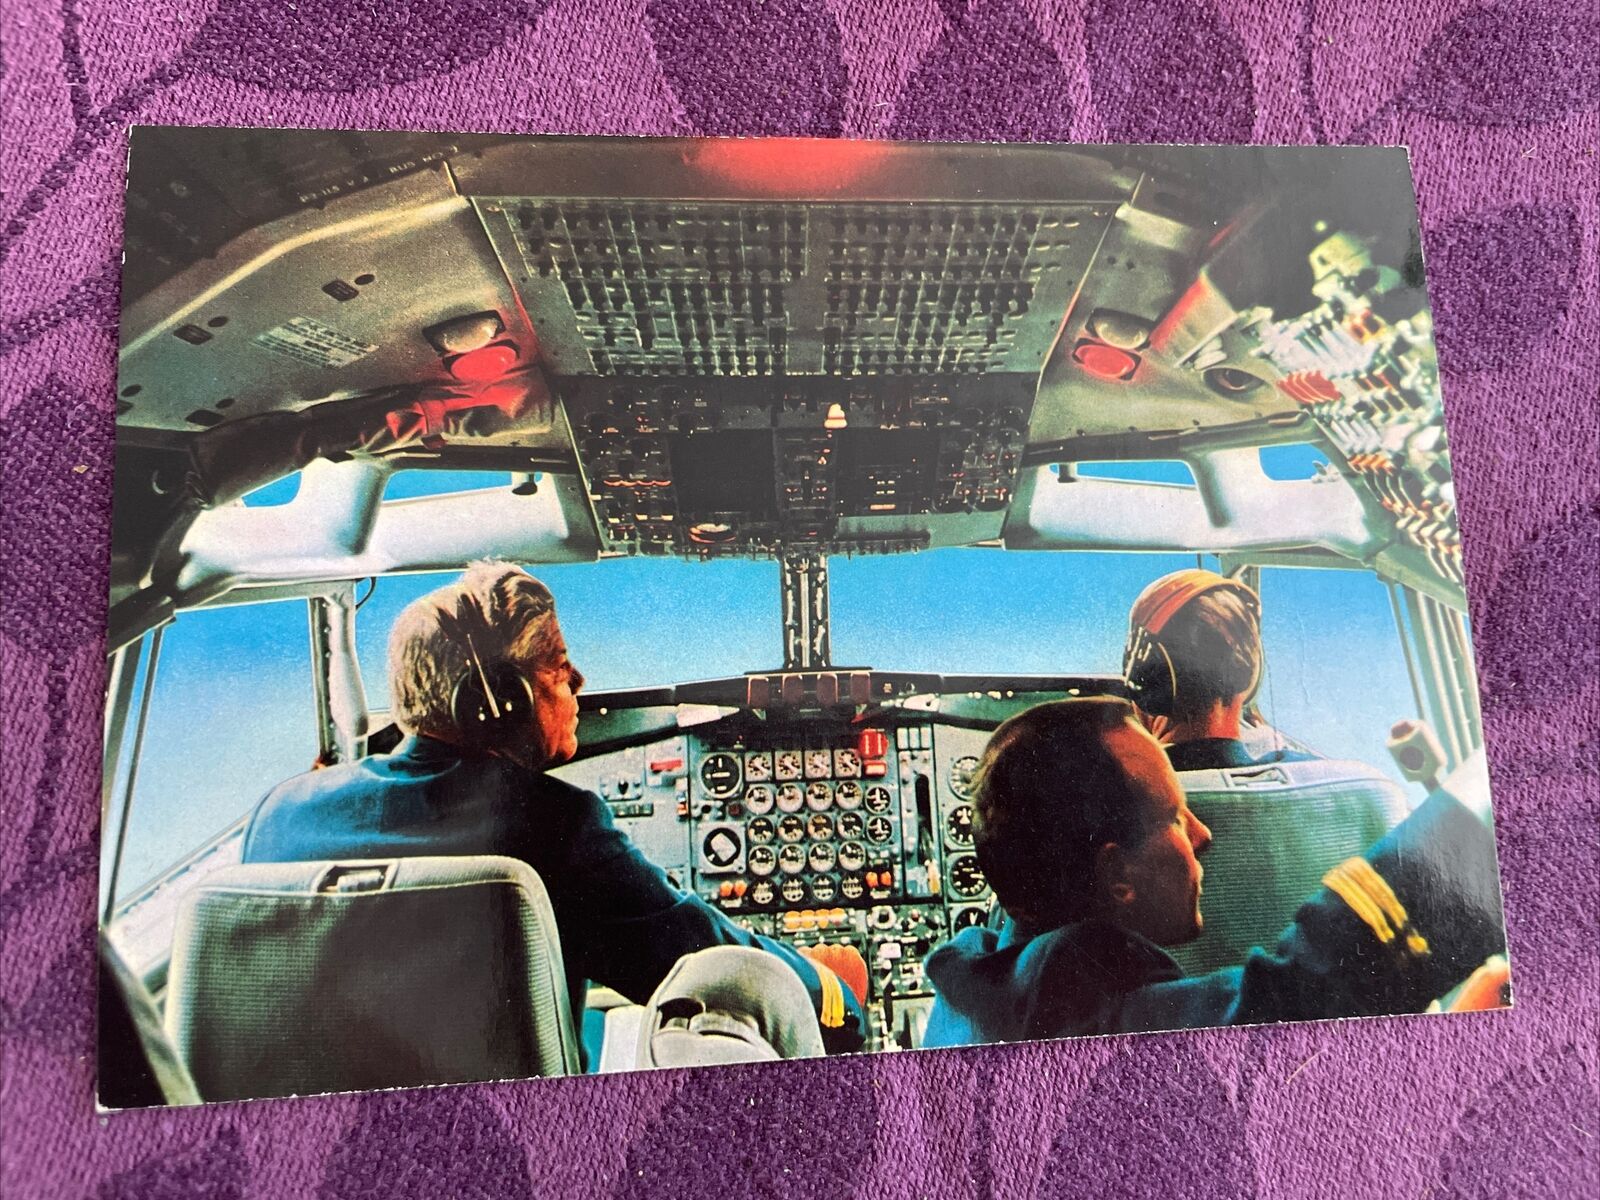 Lufthansa Airlines issued 707 intercontinental jet cockpit view cont/l  postcard